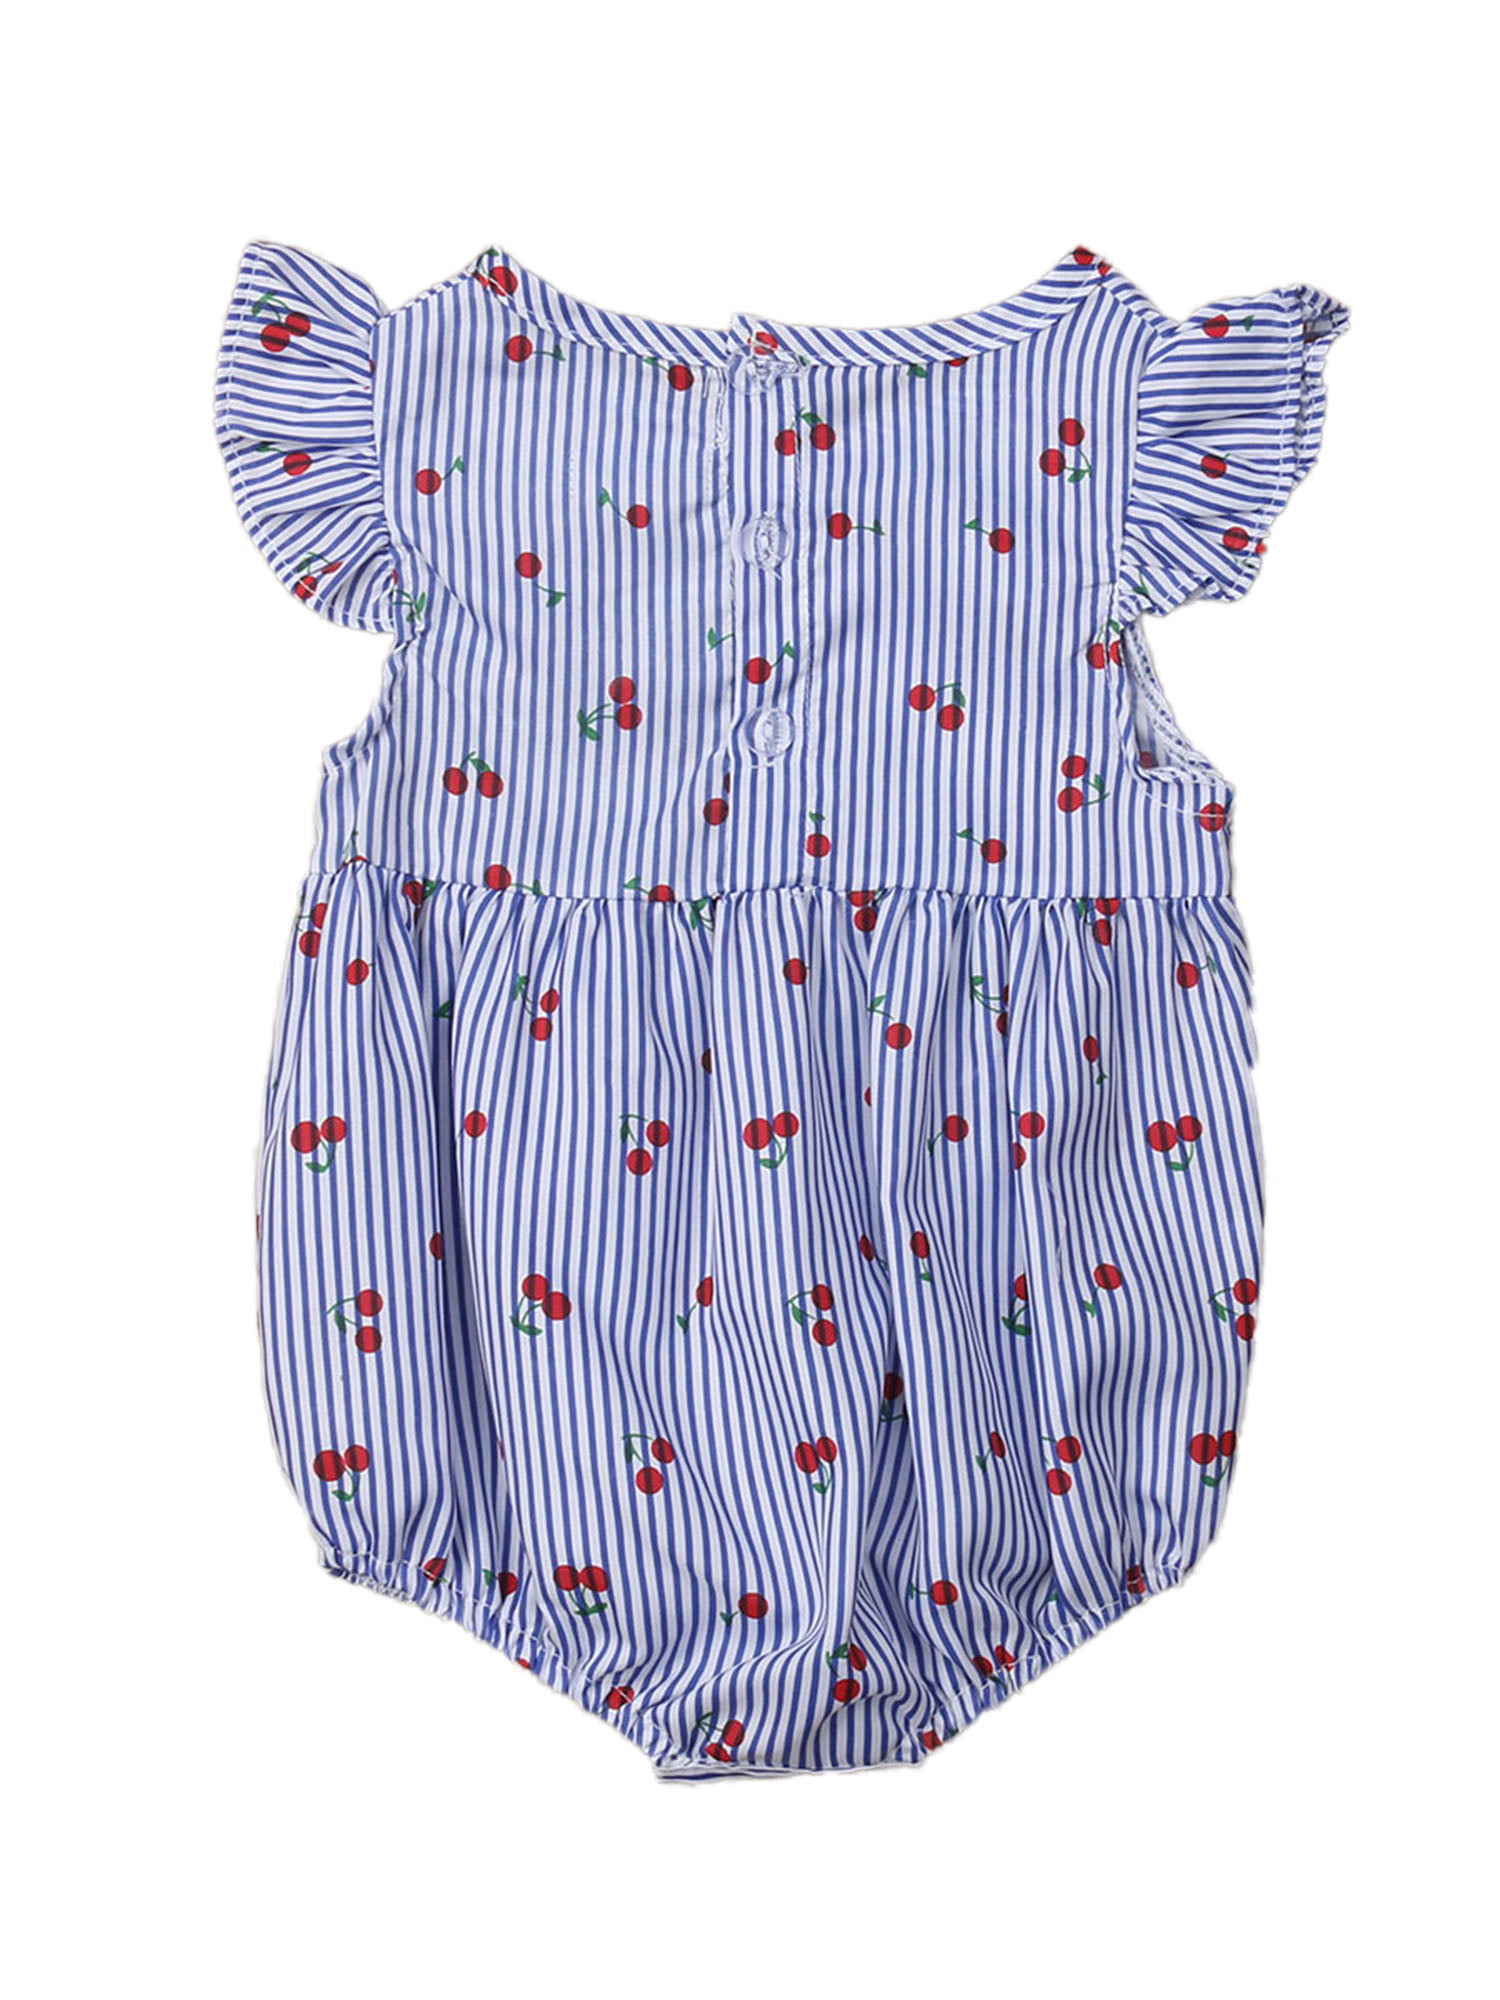 USA Baby Girl Striped Cherry Fly Sleeve Pink Blue Sunsuit Outfit 0-18 Months 